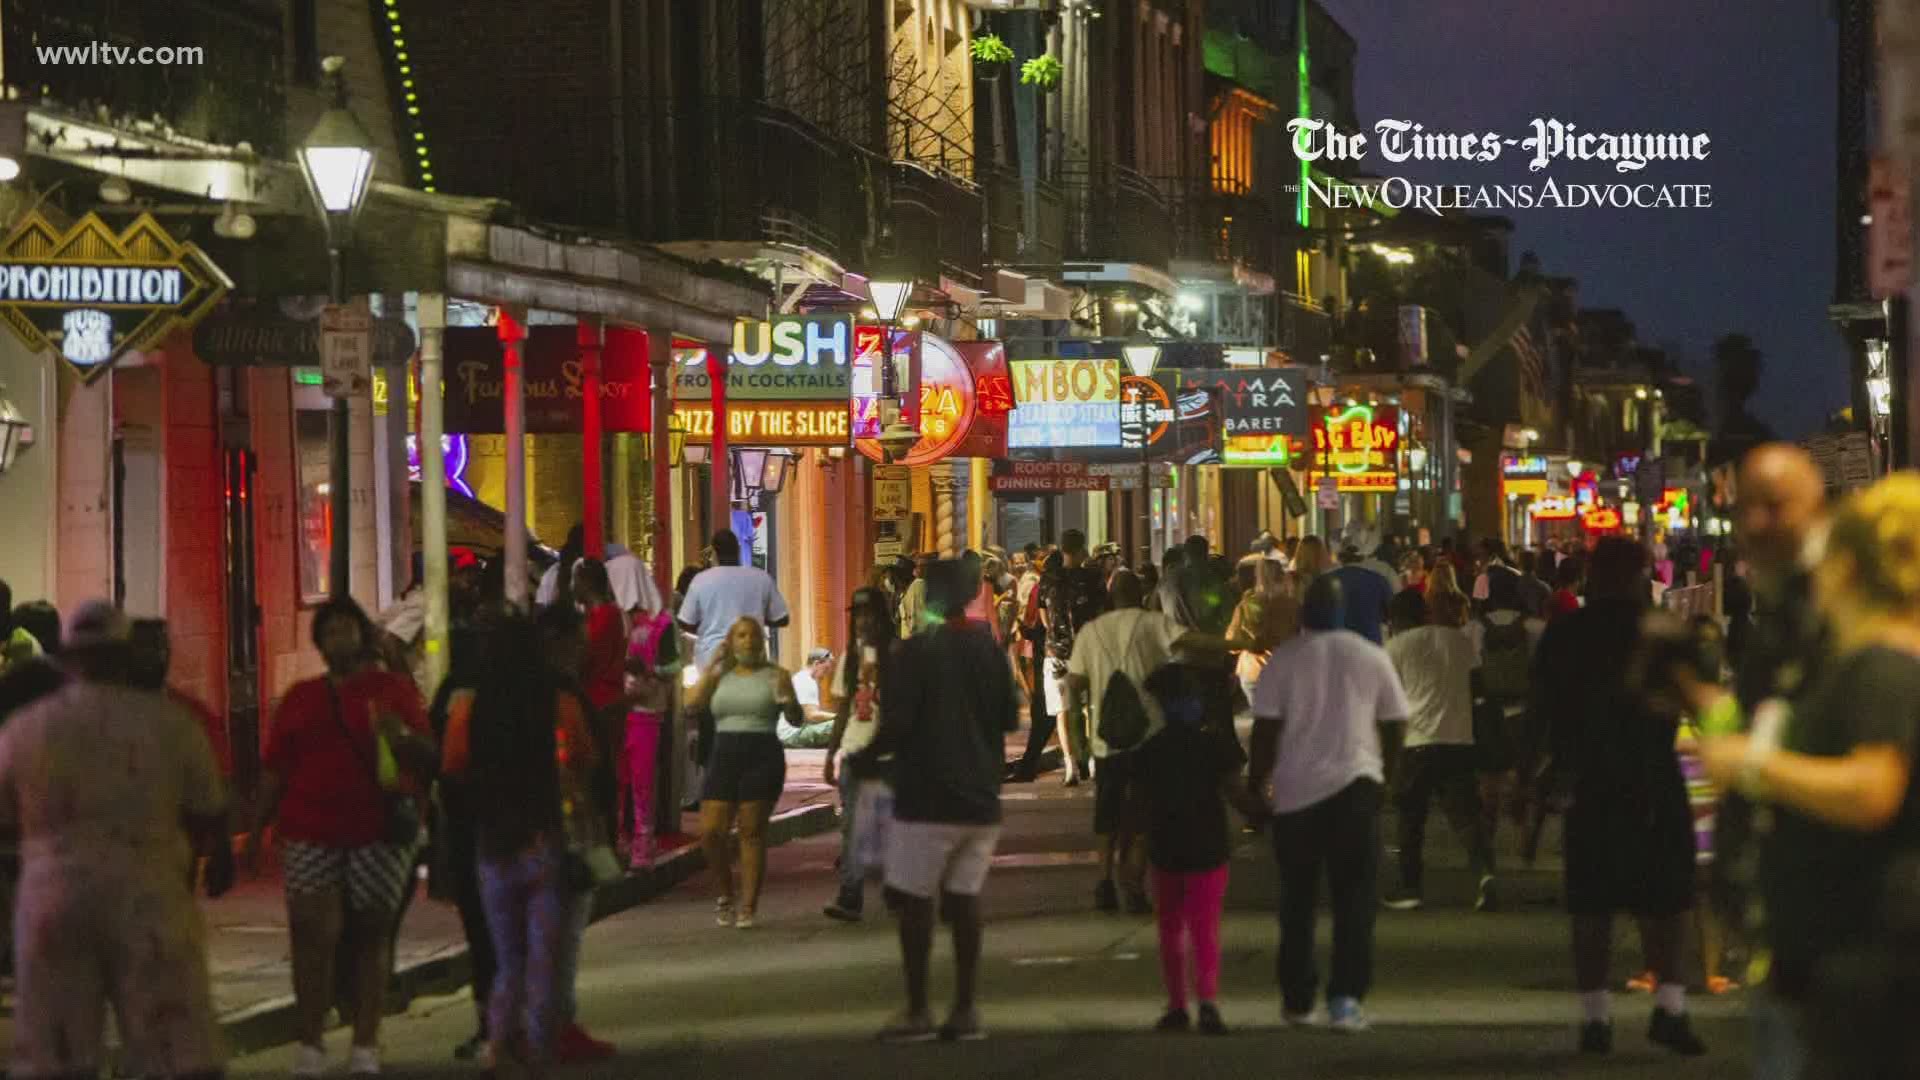 New Orleans city officials are concerned after seeing crowds on Bourbon Street this weekend.